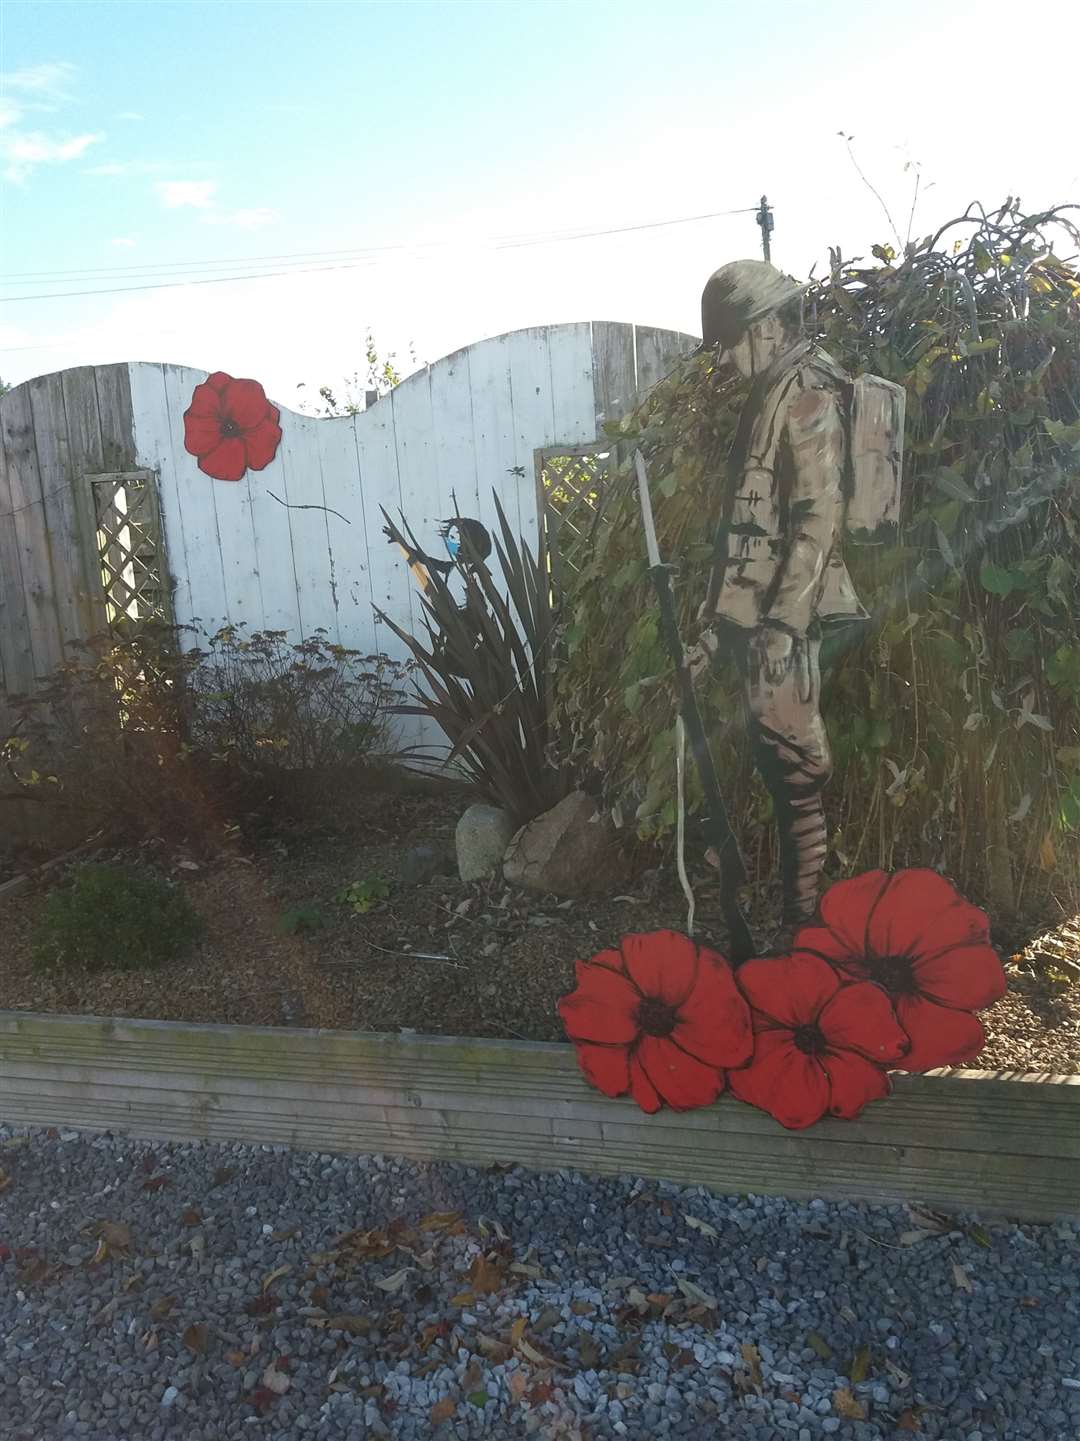 Jimmy Cameron, from Urquhart, made his own soldier and poppies tribute.